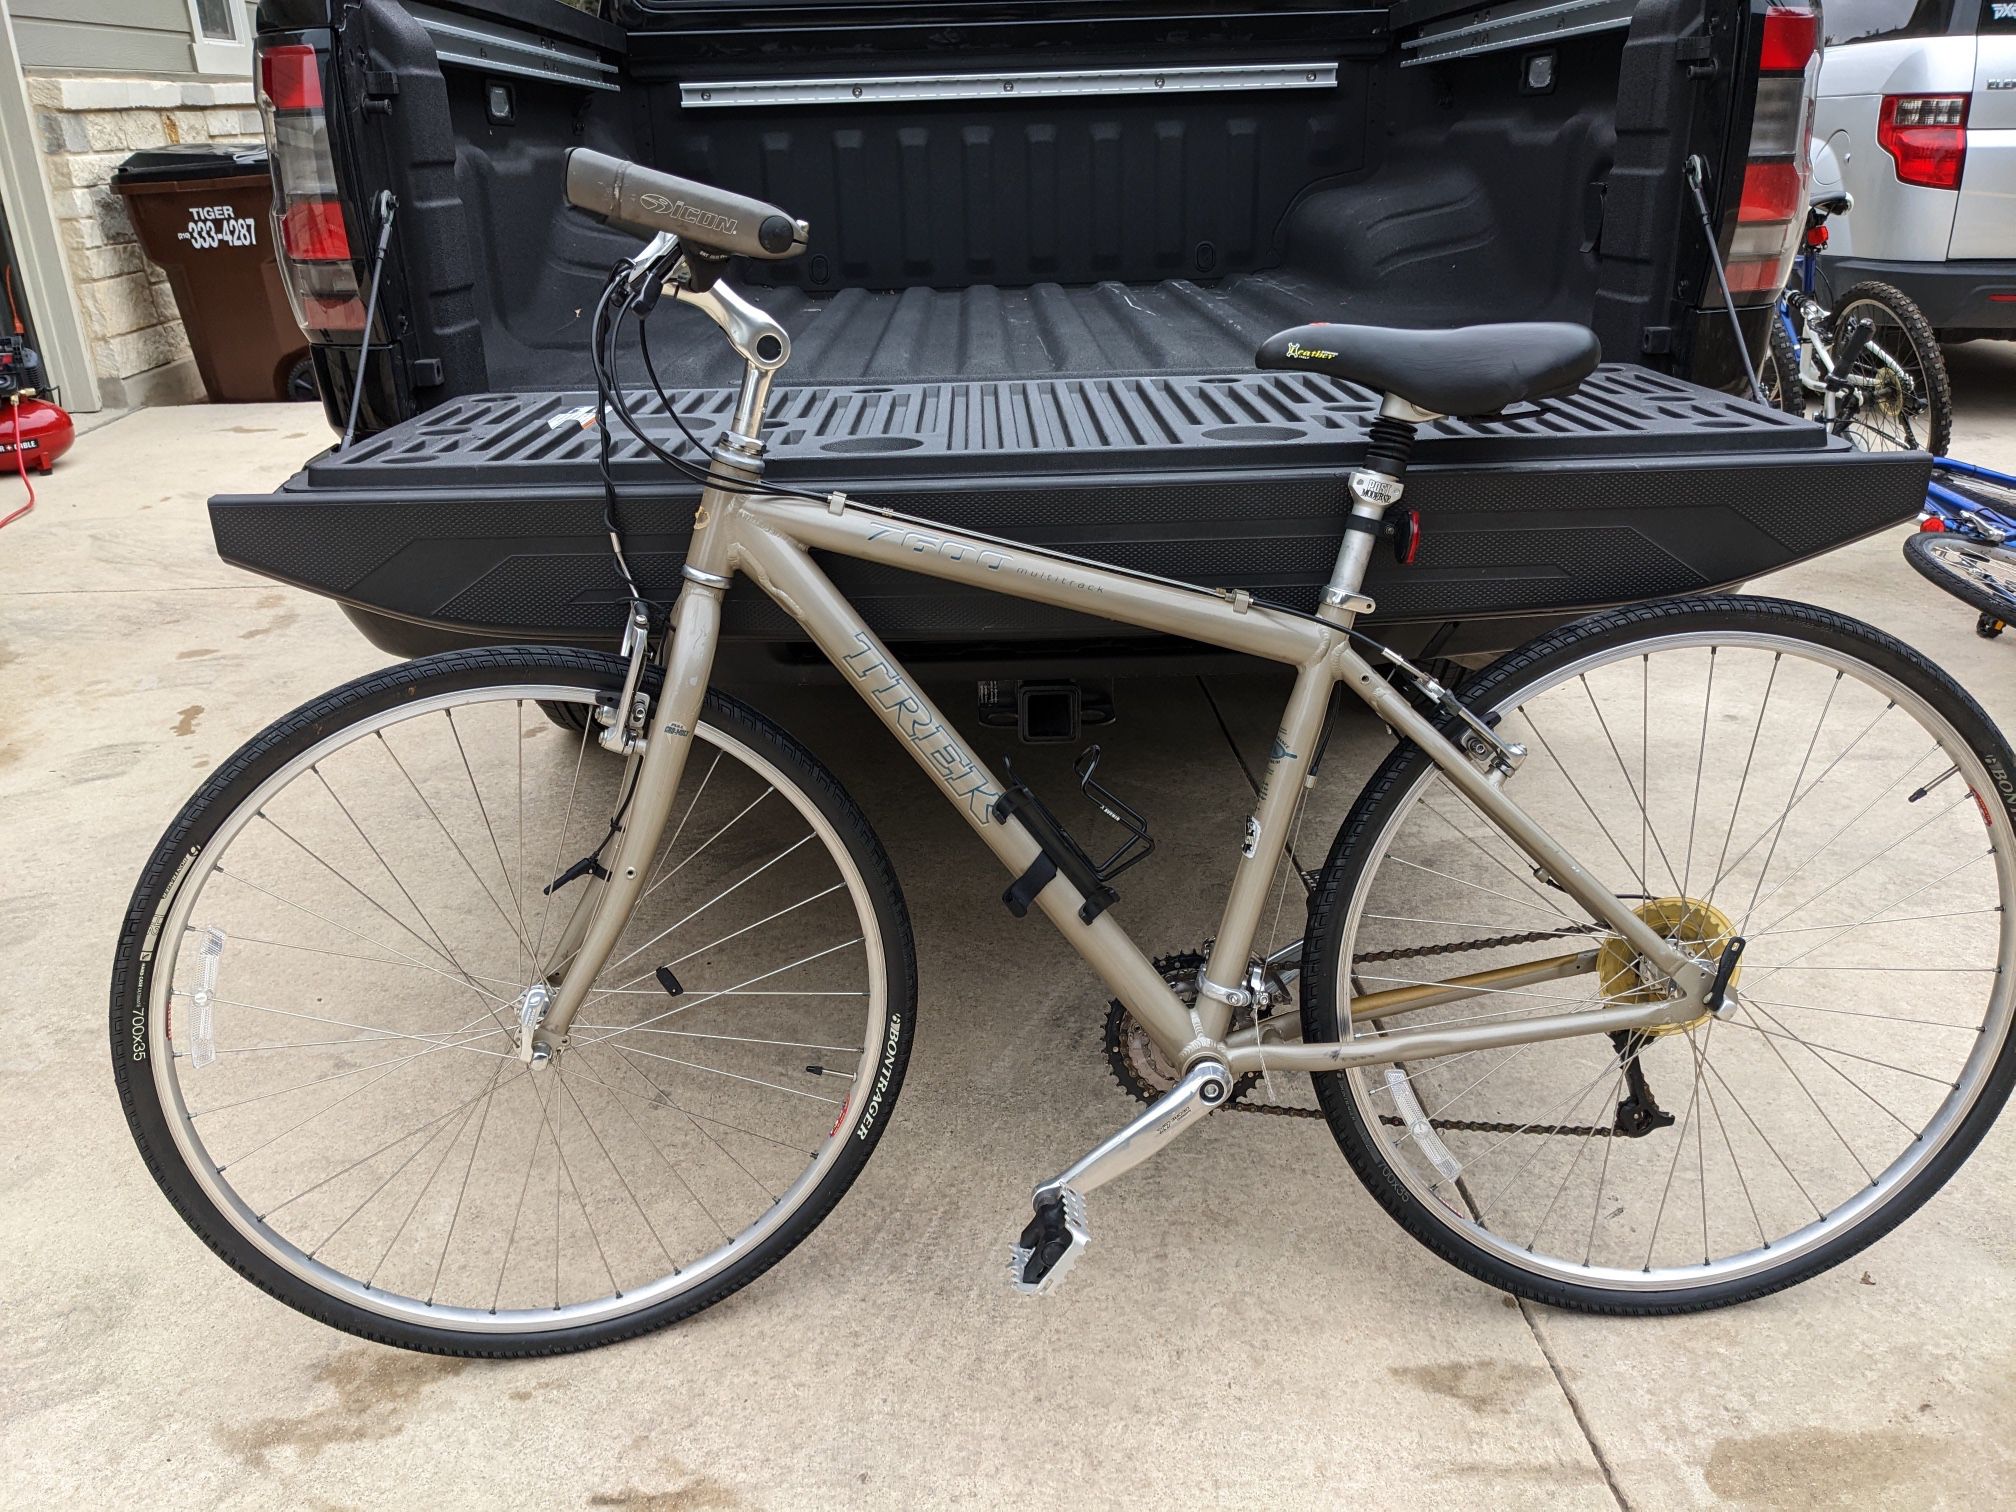 Trek 7600 Bicycle! Really Good Condition!